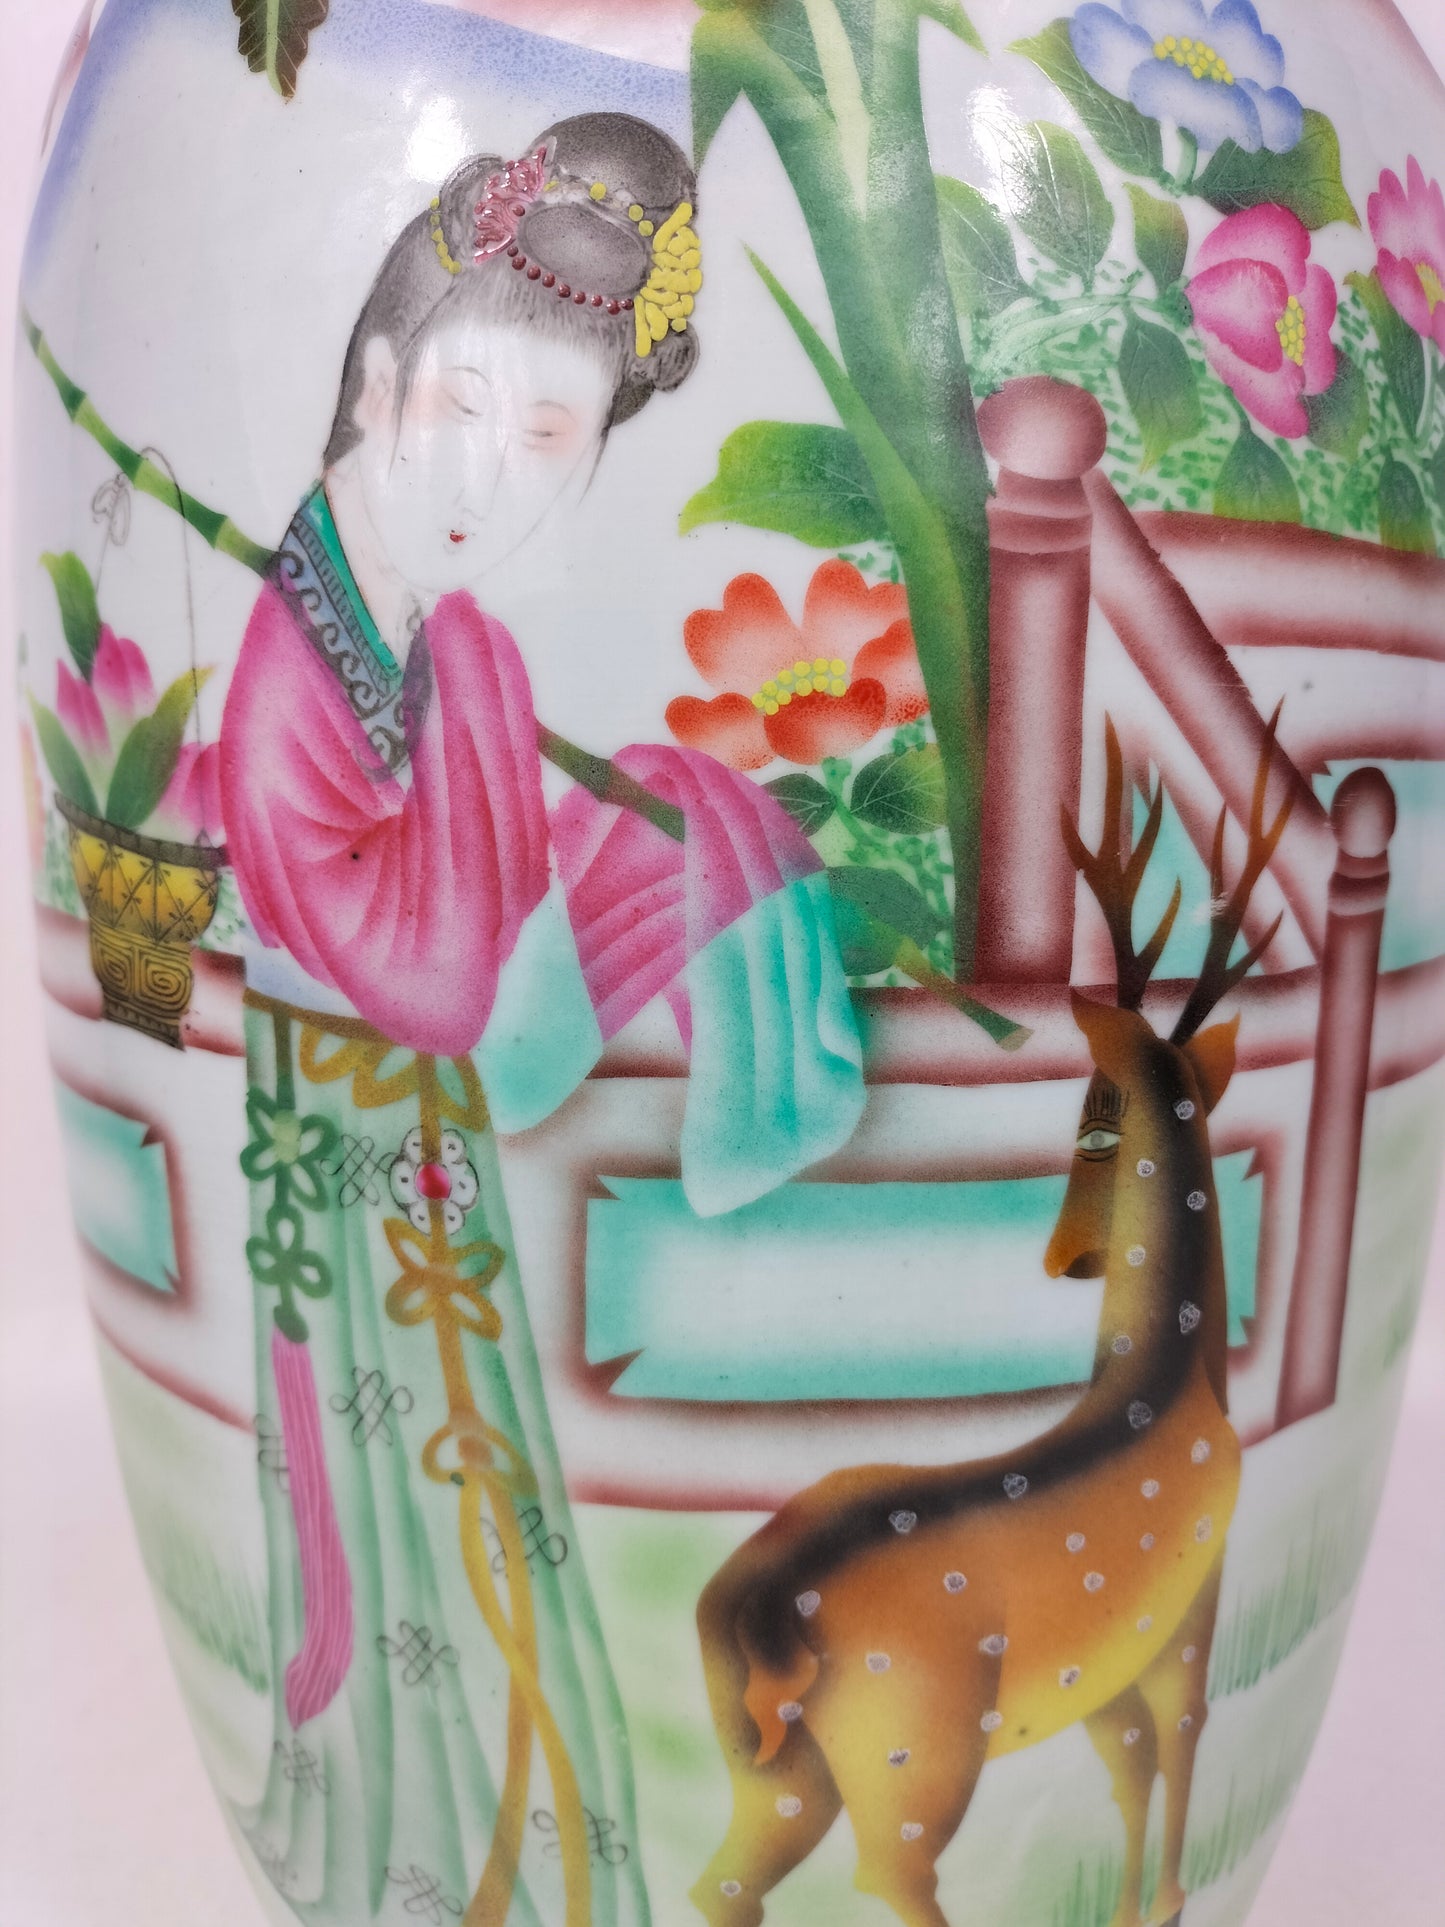 Large antique Chinese vase decorated with a lady and a deer // Republic Period (1912-1949)